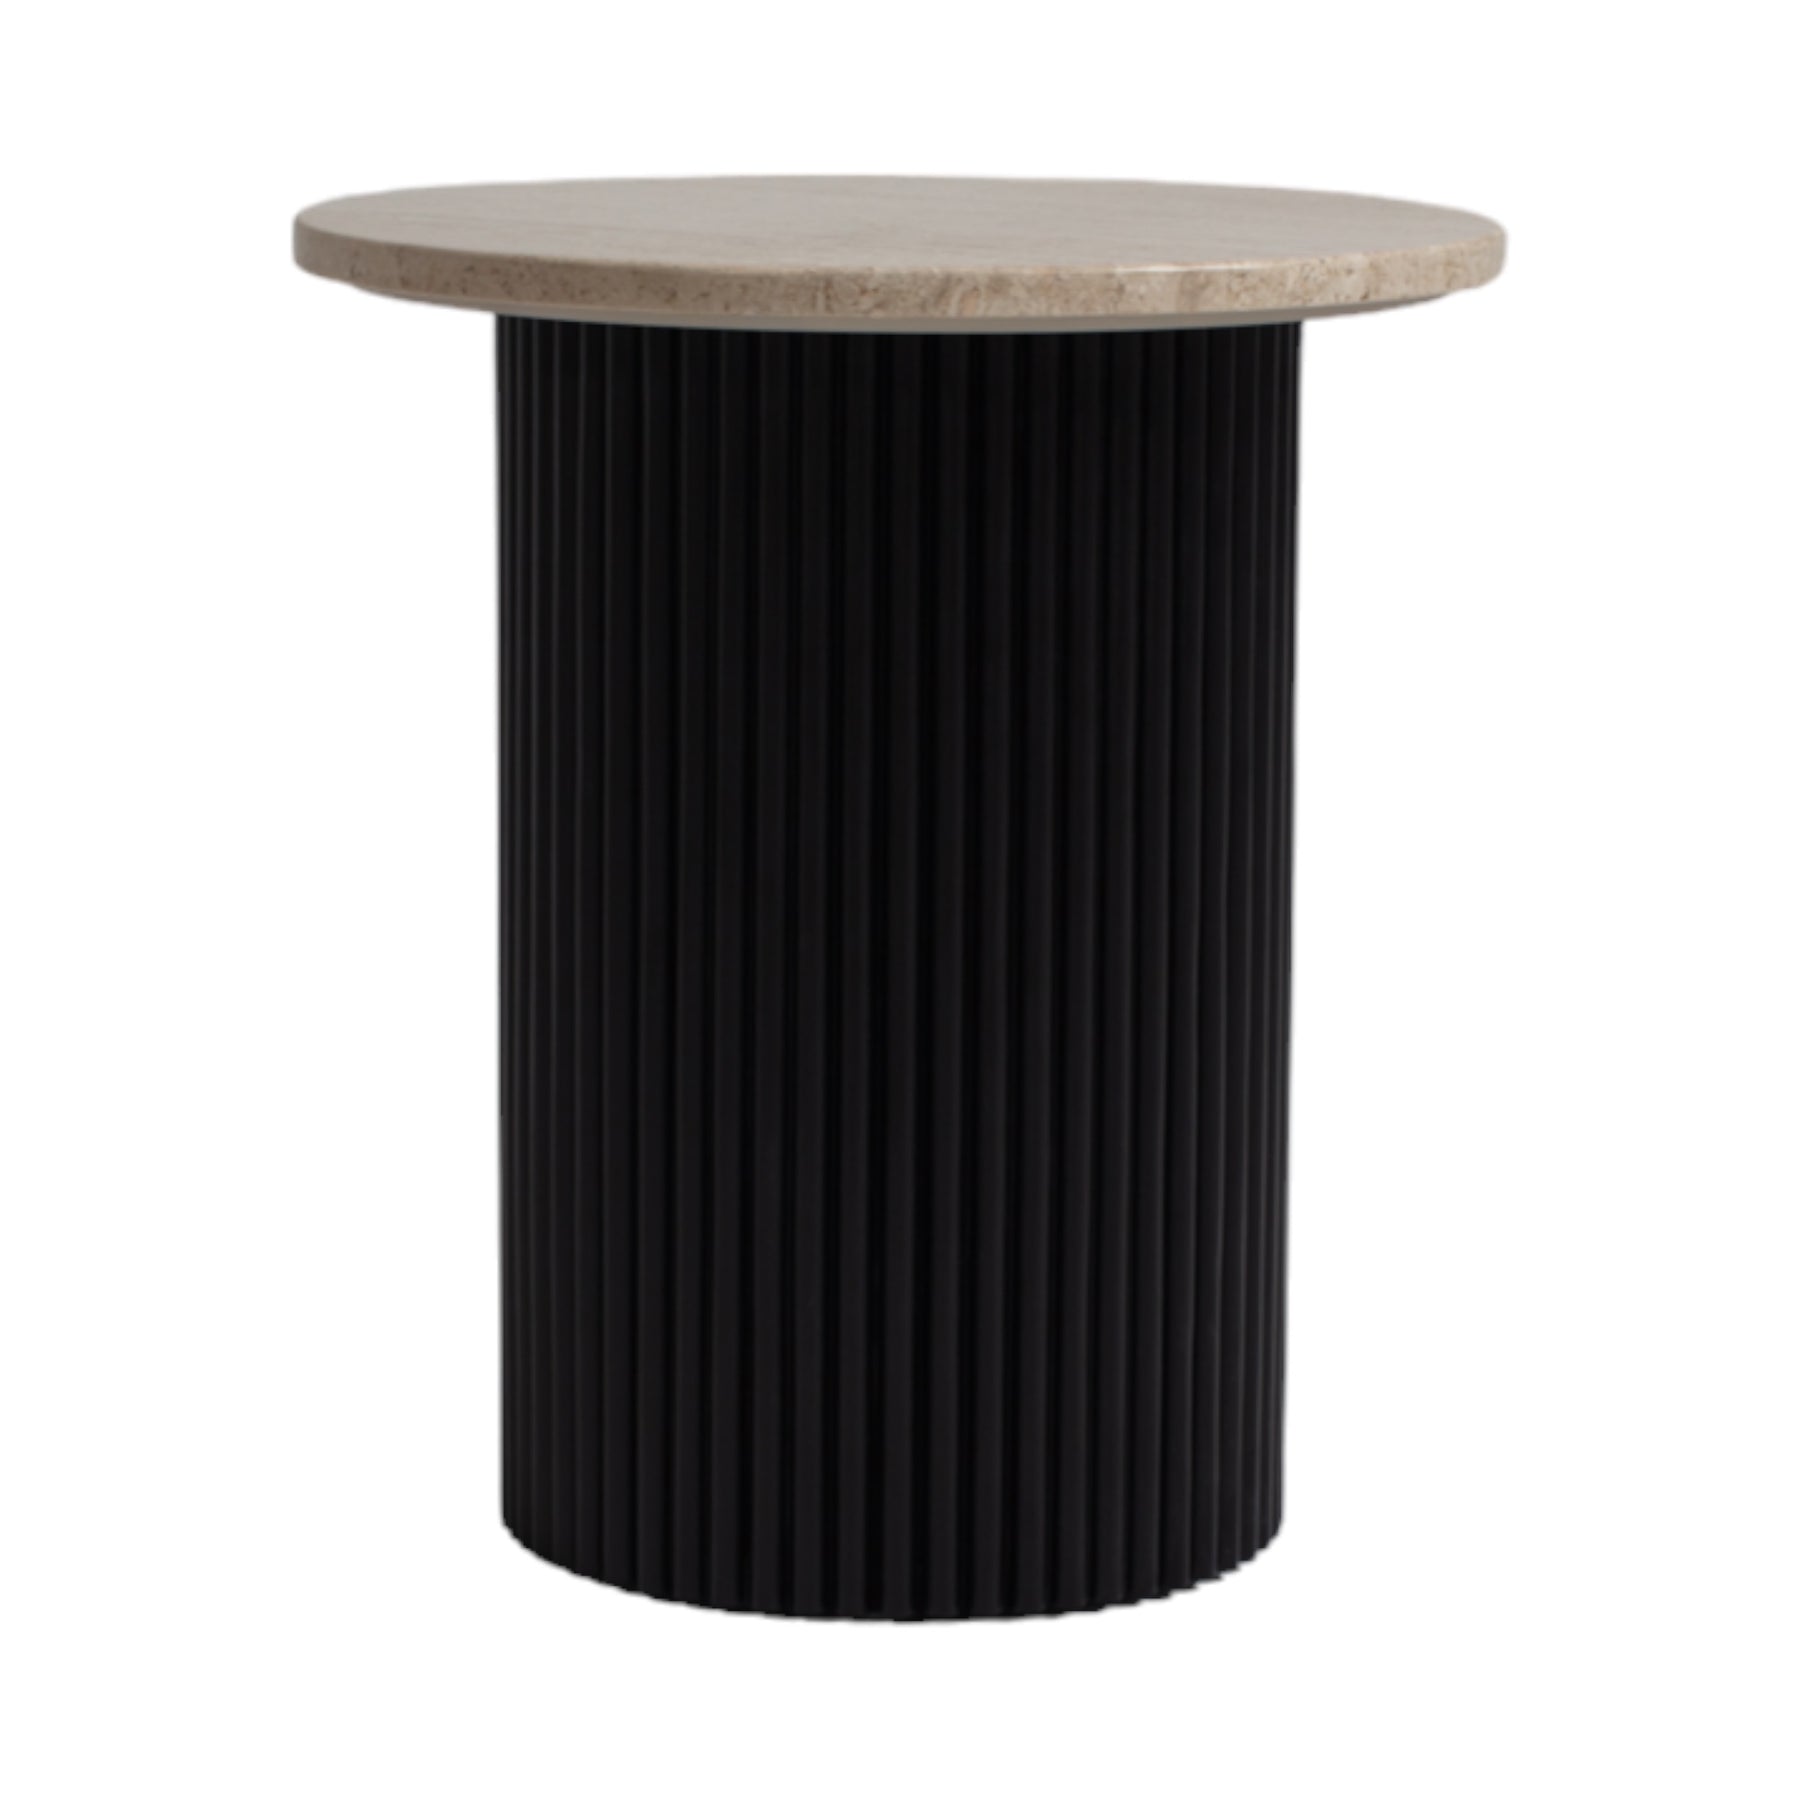 HAND MADE BLACK NORDIC DIANNA BEIGE MARBLE FLUTED SIDE TABLE